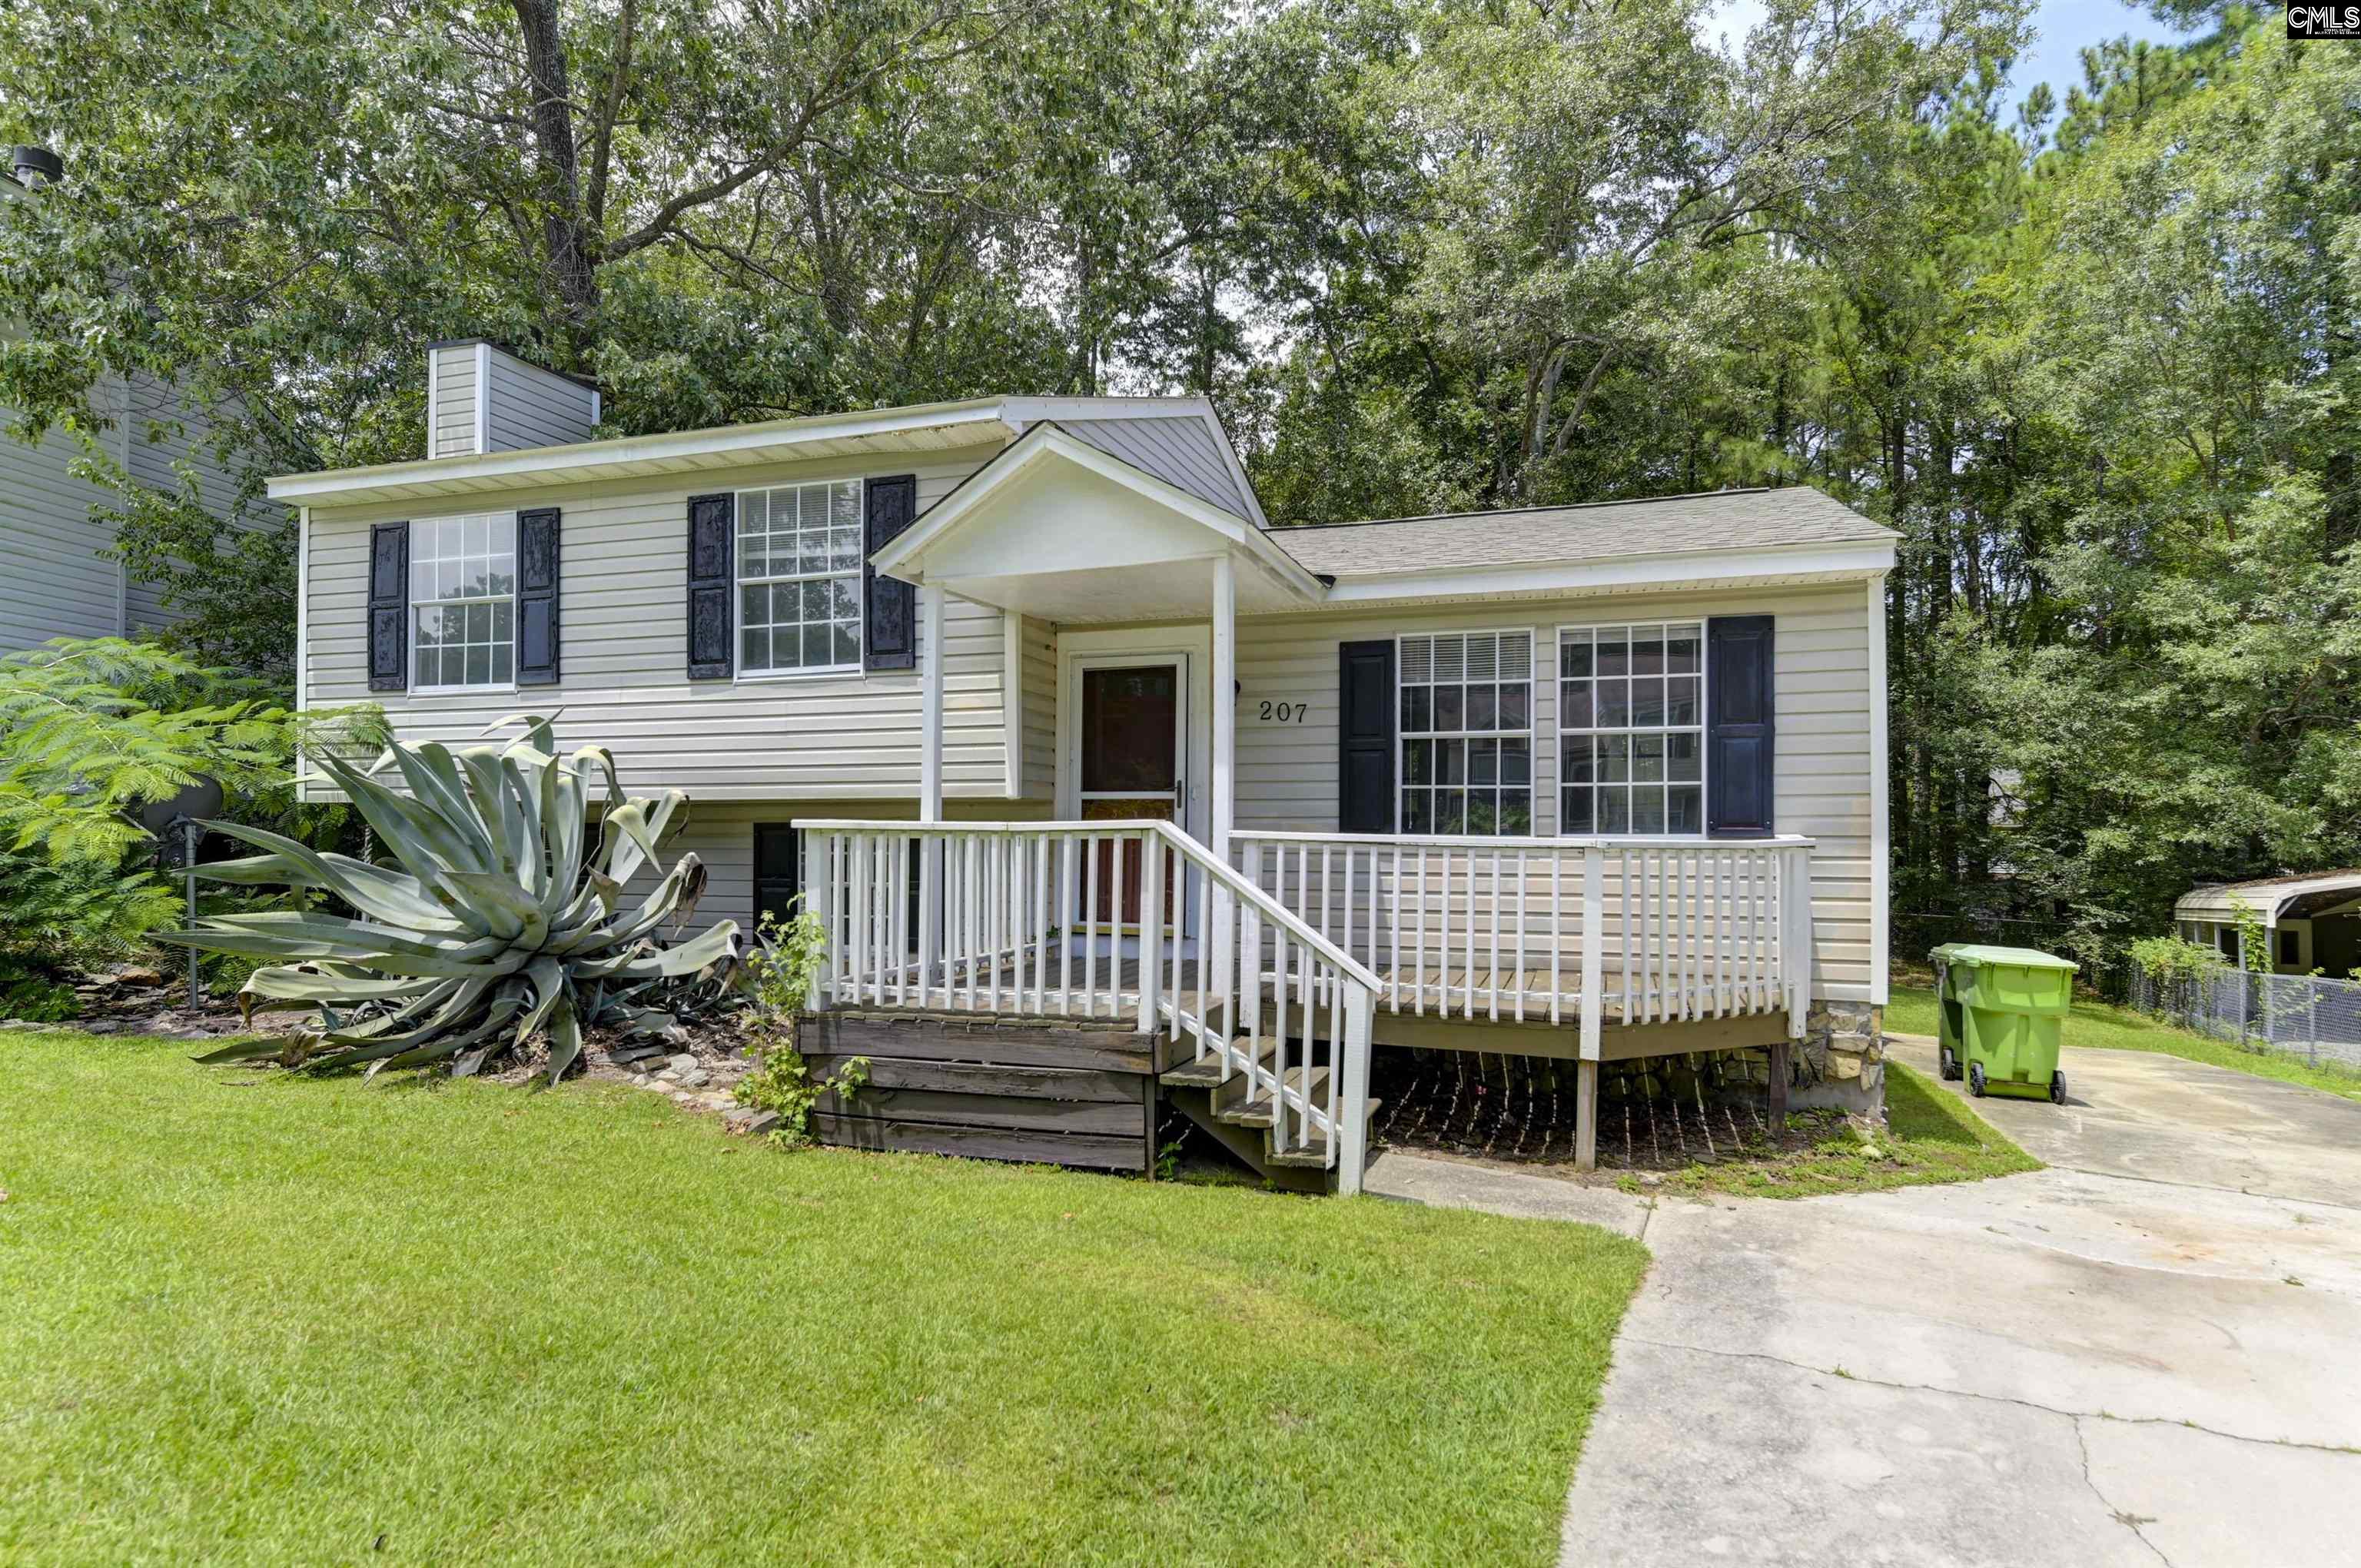 207 Woodspur Road Irmo, SC 29063